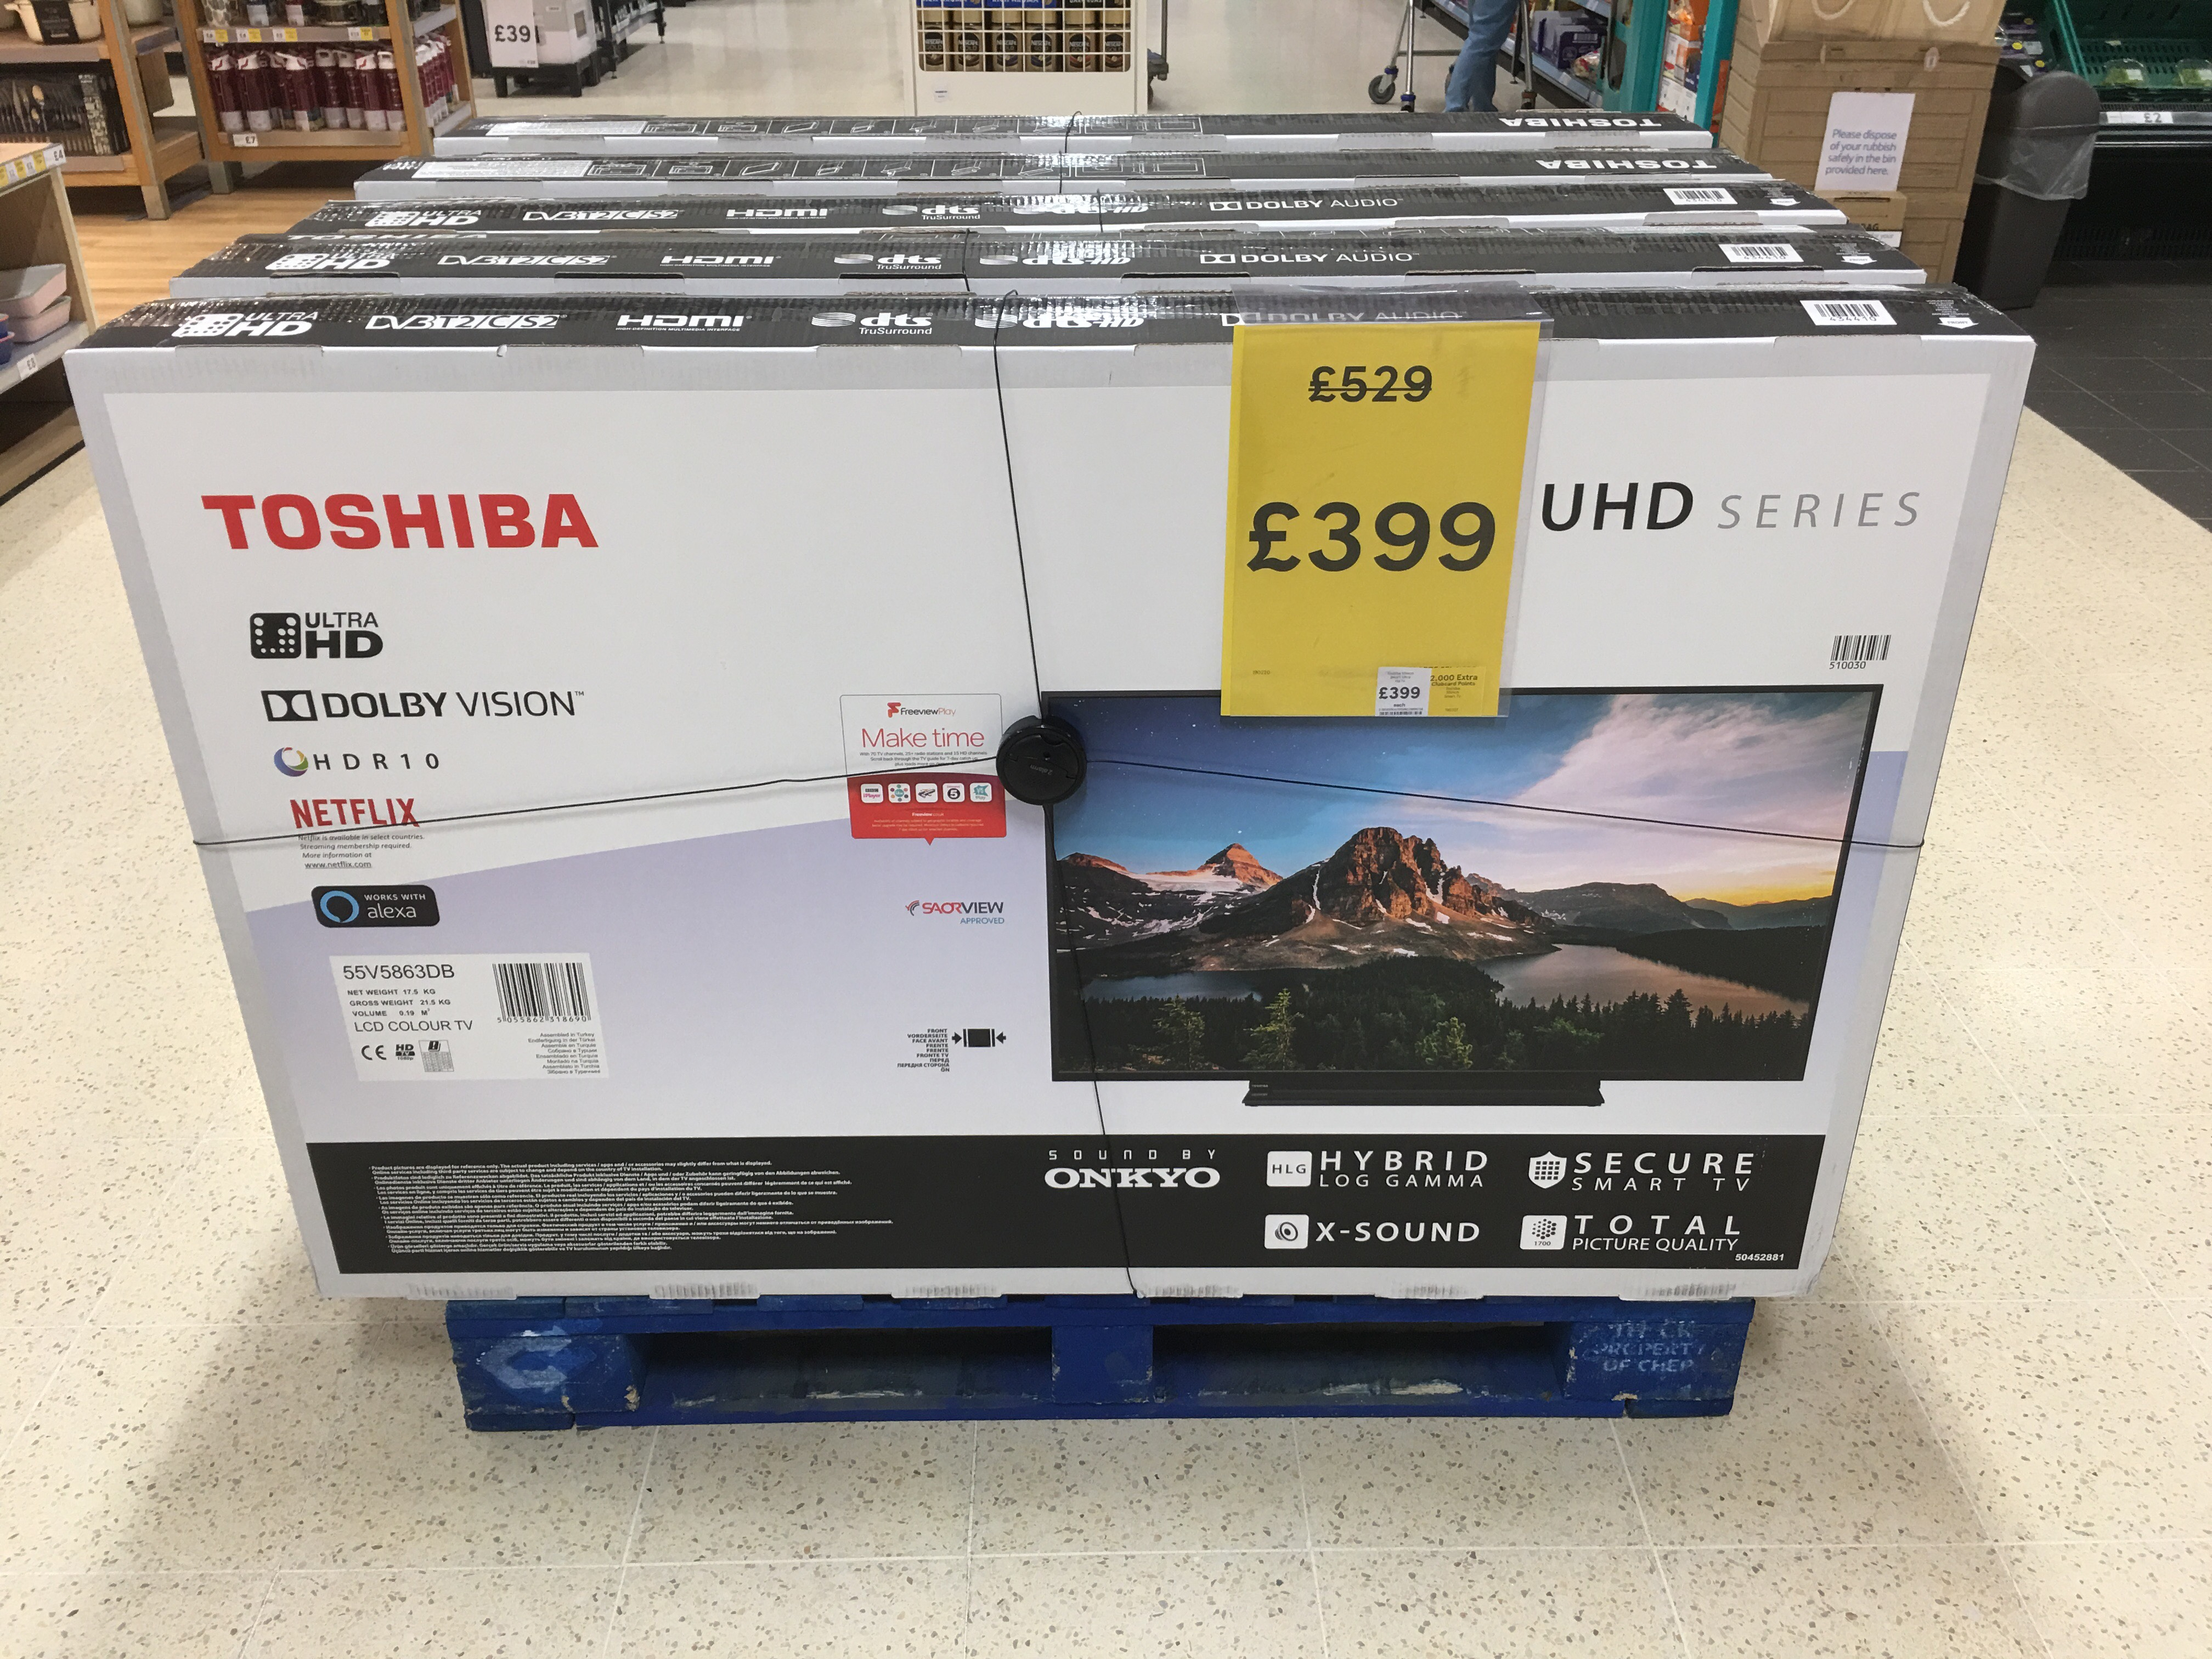 Toshiba 55V5863DB 55-Inch Smart 4K Ultra-HD HDR LED WiFi TV with Freeview Play- Black/Silver £ ...